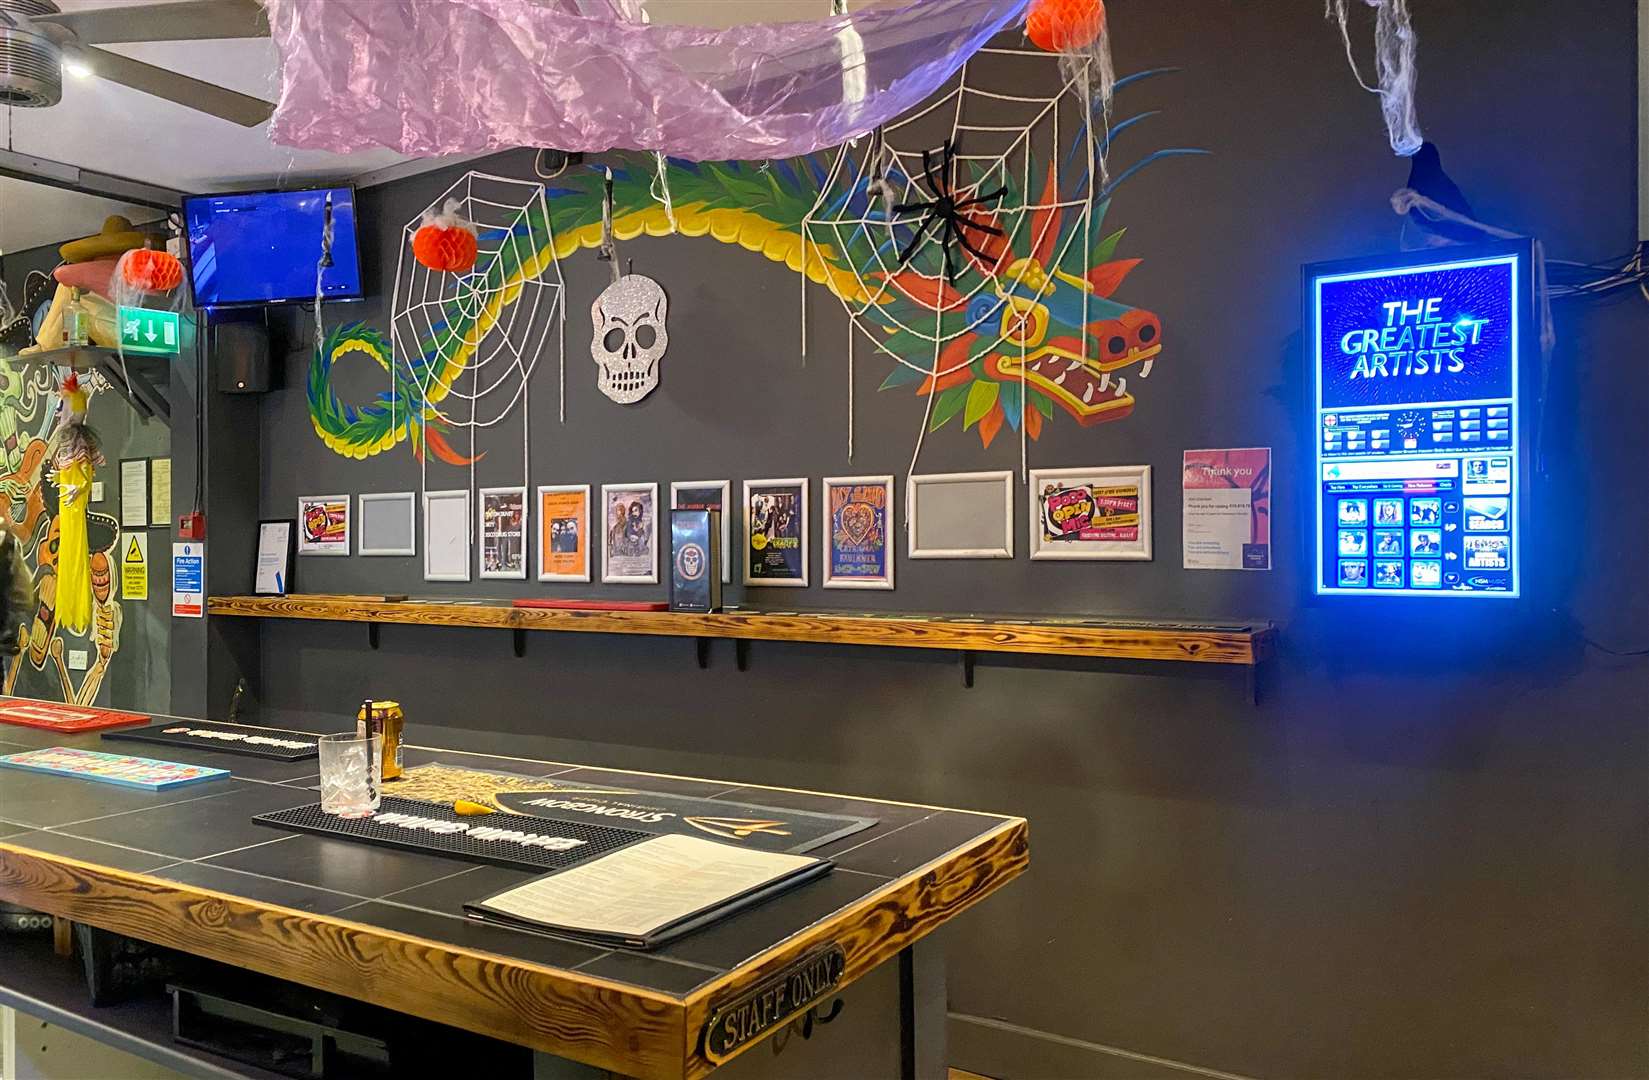 The bar area was full of Halloween-themed decorations